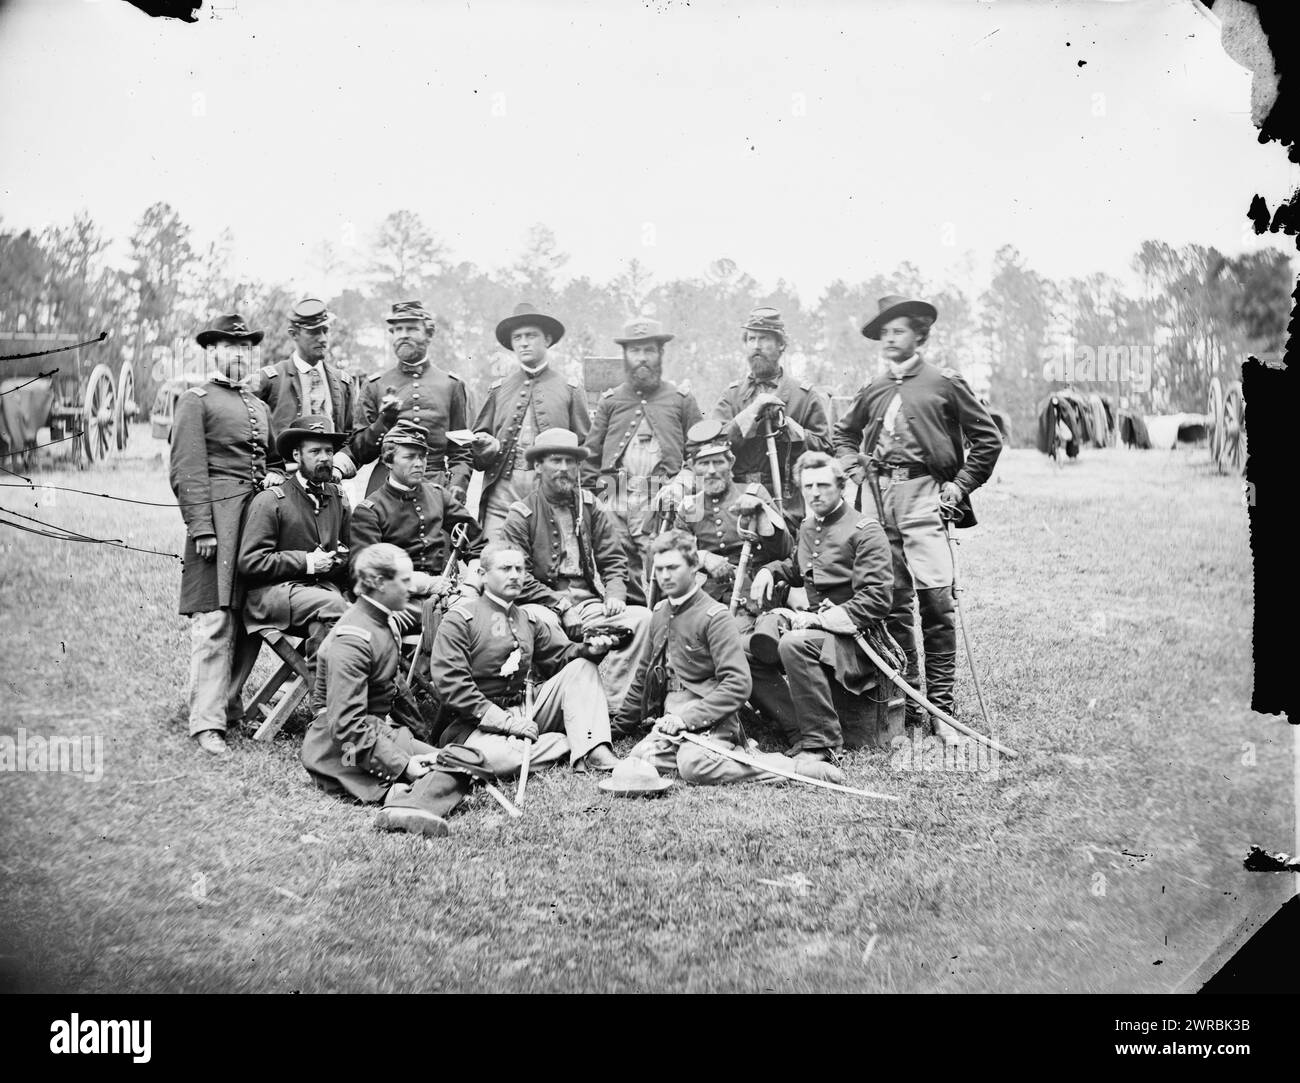 Fair Oaks, Va., vicinity. Brigade officers of the Horse Artillery commanded by Lt. Col. William Hays, Photograph from the main eastern theater of war, the Peninsular Campaign, May-August 1862. Standing, left to right: Lt. Edmund Pendleton, PLt. Alex C. M. Pennington, Capt. Henry Benson, Capt, H. M. Gibson, Lt. James E. Wilson, Capt. John C. Tidball, Lt. William N. Dennison. Seated, left to right: Capt. Horatio Gibson, Lt. Peter C. Hains, Lt. Col. William Hays, Capt. James M. Robertson, Lt. J. W. Barlow. Seated on the ground, left to right: Lt. Robert H. Chapin, Lt. Robert Clarke Stock Photo